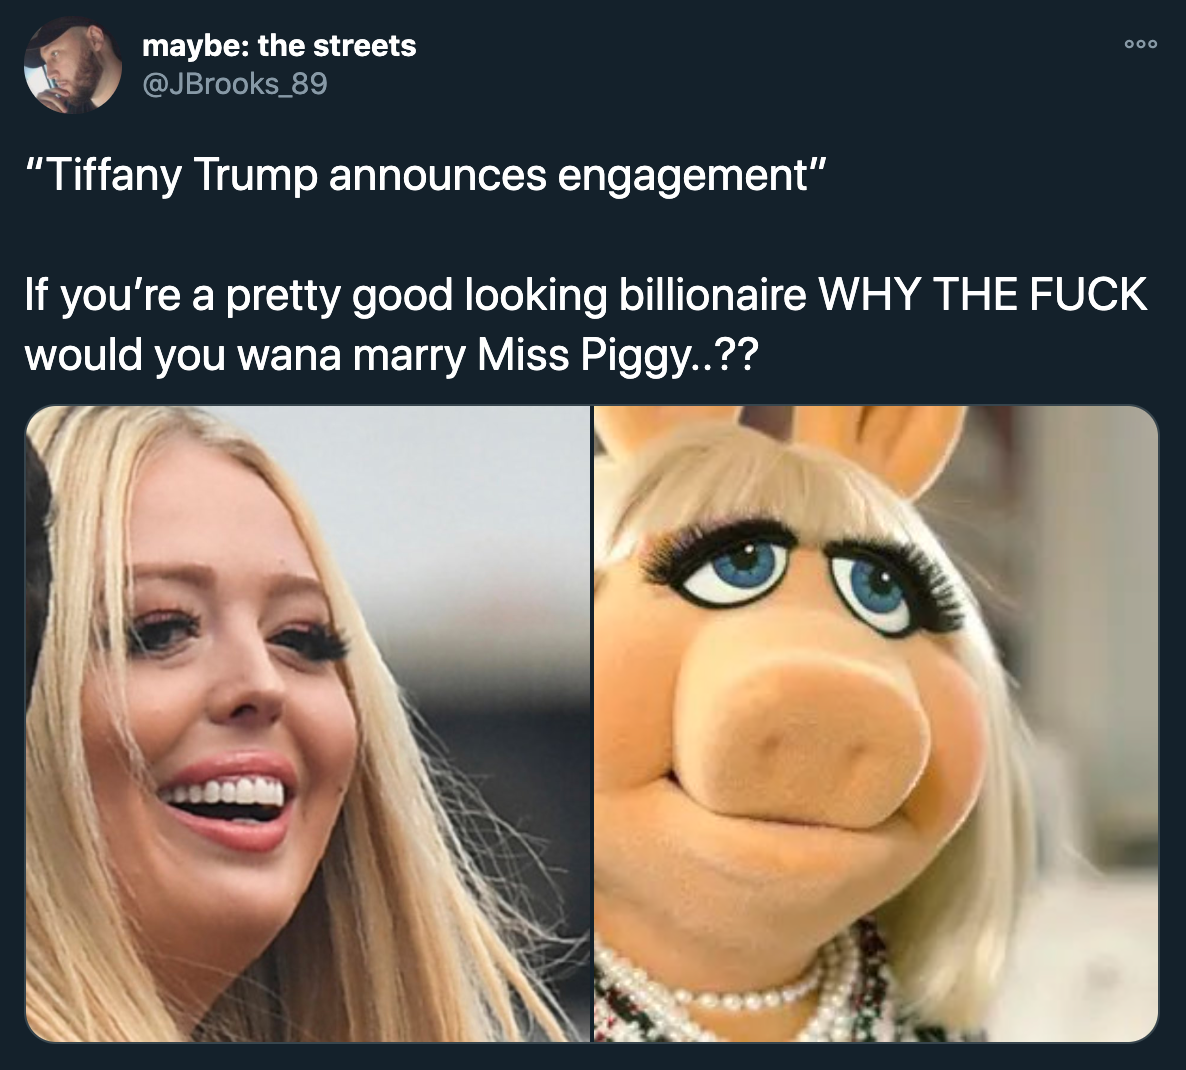 tiffany trump engagement - tiffany trump announces engagement. If you're a pretty good looking billionaire why the fuck would you wanna marry miss piggy?